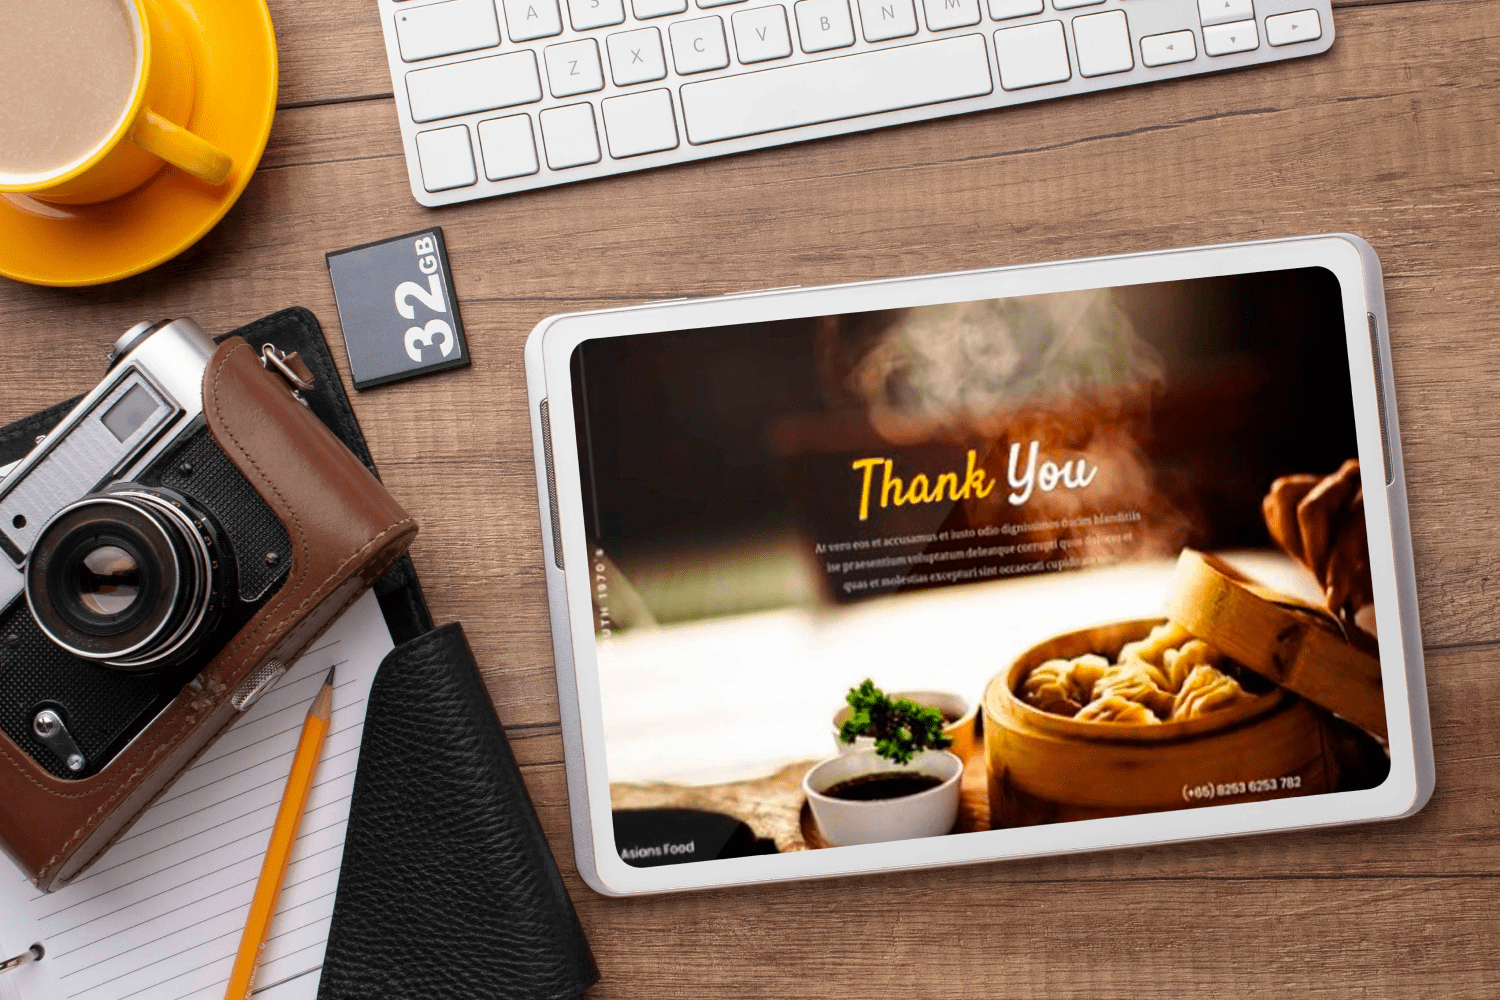 Asians Food - Food PowerPoint by MasterBundles note preview mockup image.